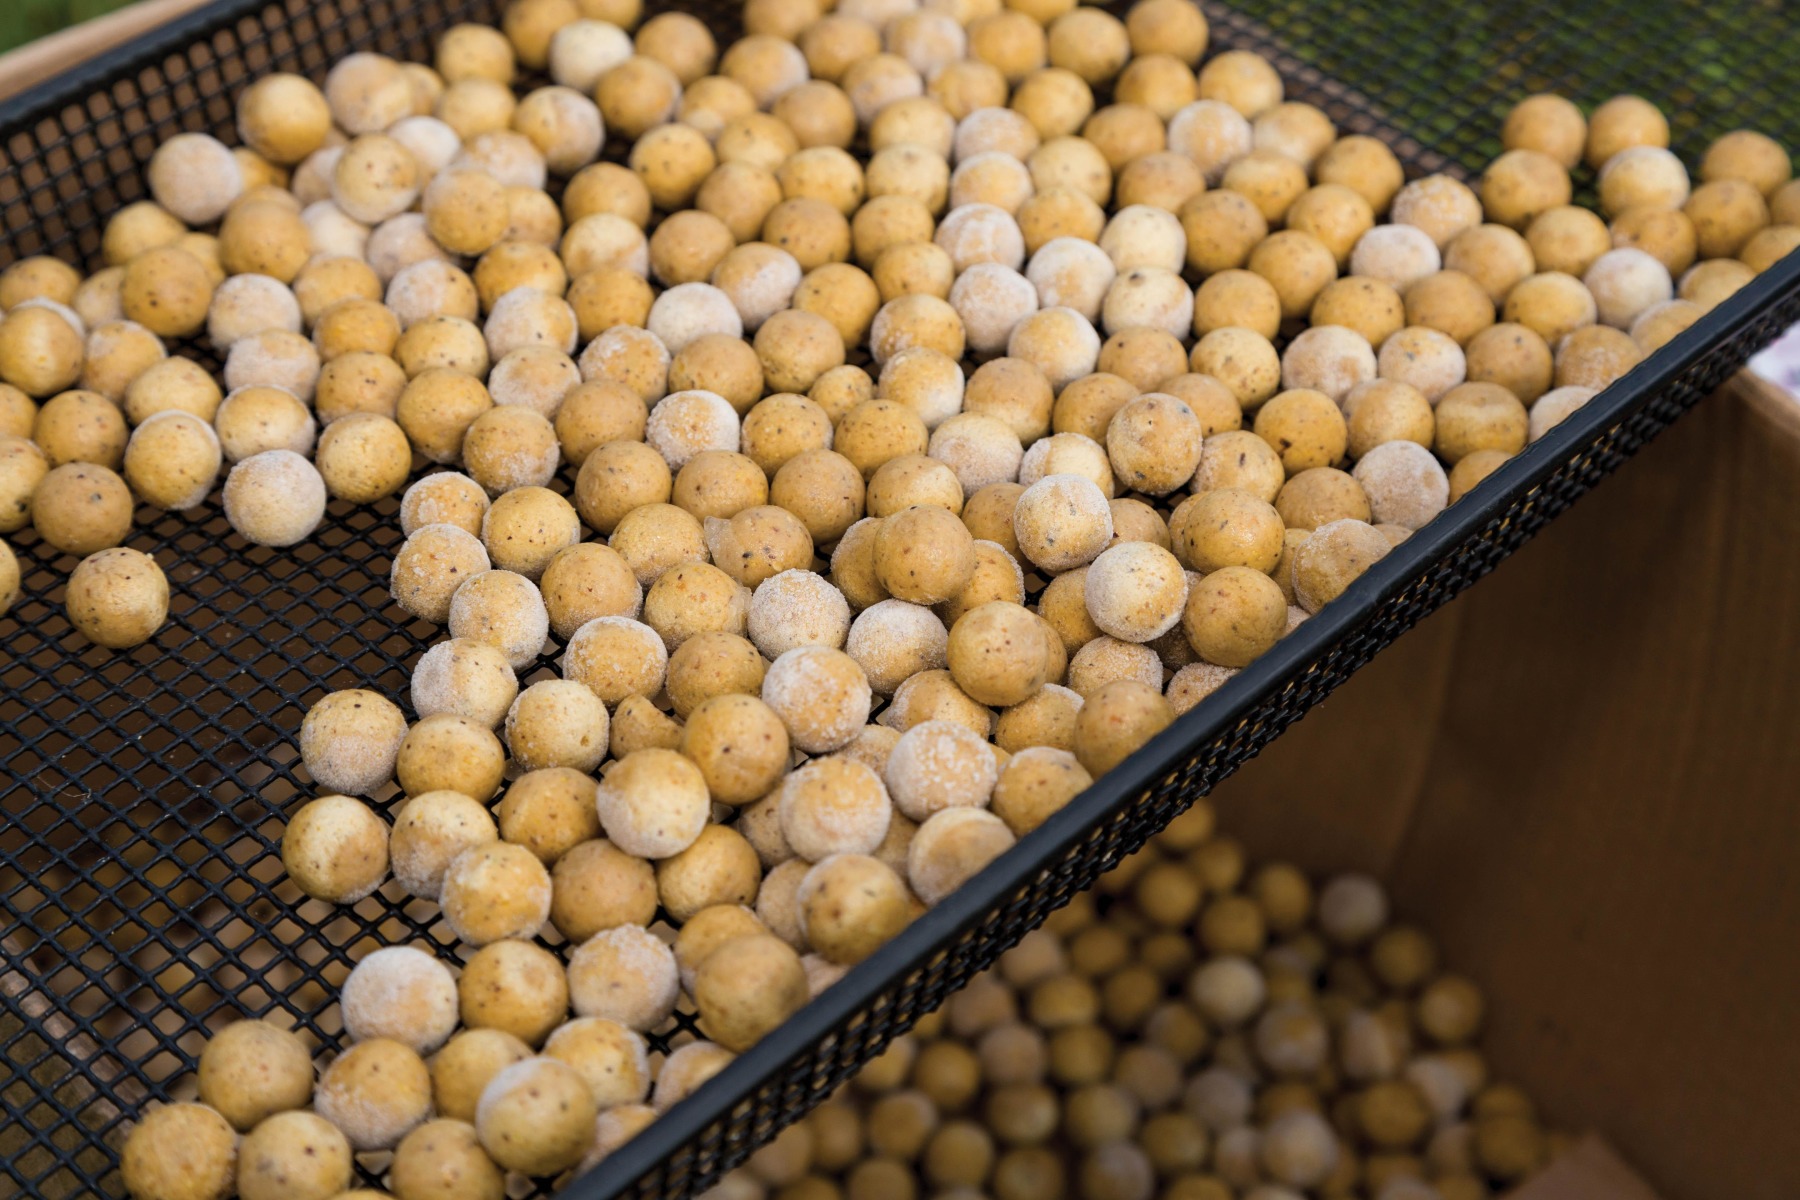 1. Tip your boilies out in single layers on cardboard boxes or a mesh - never let them defrost in the bag.